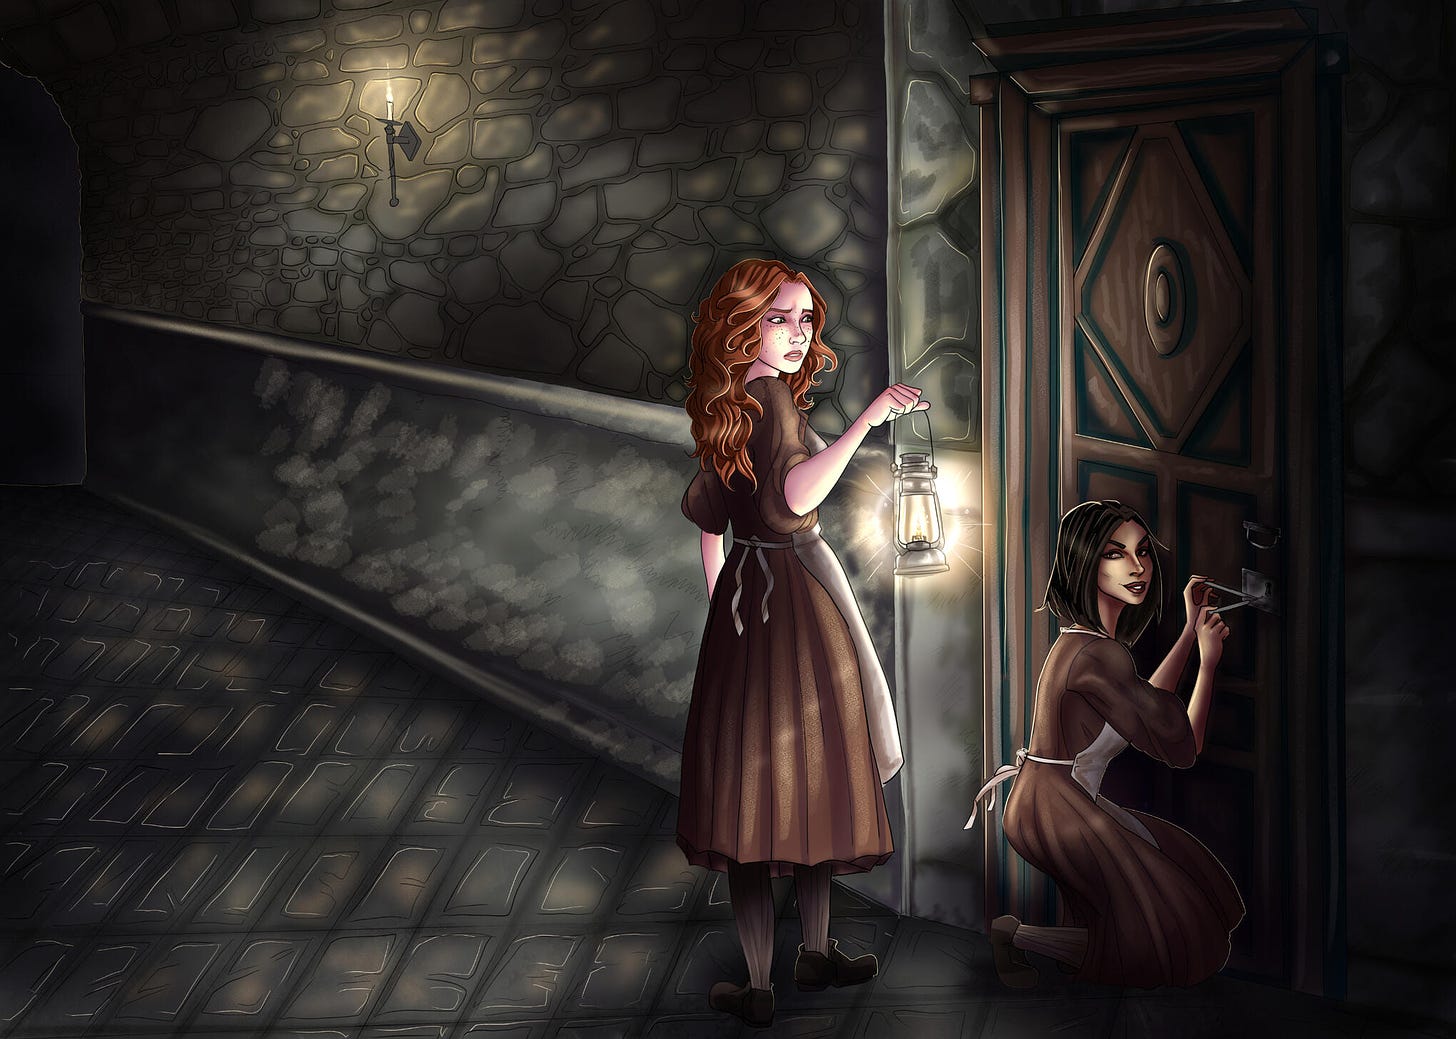 A drawing showing 2 characters in a dark hallway, one holding a lantern while the other is busy lockpicking a door